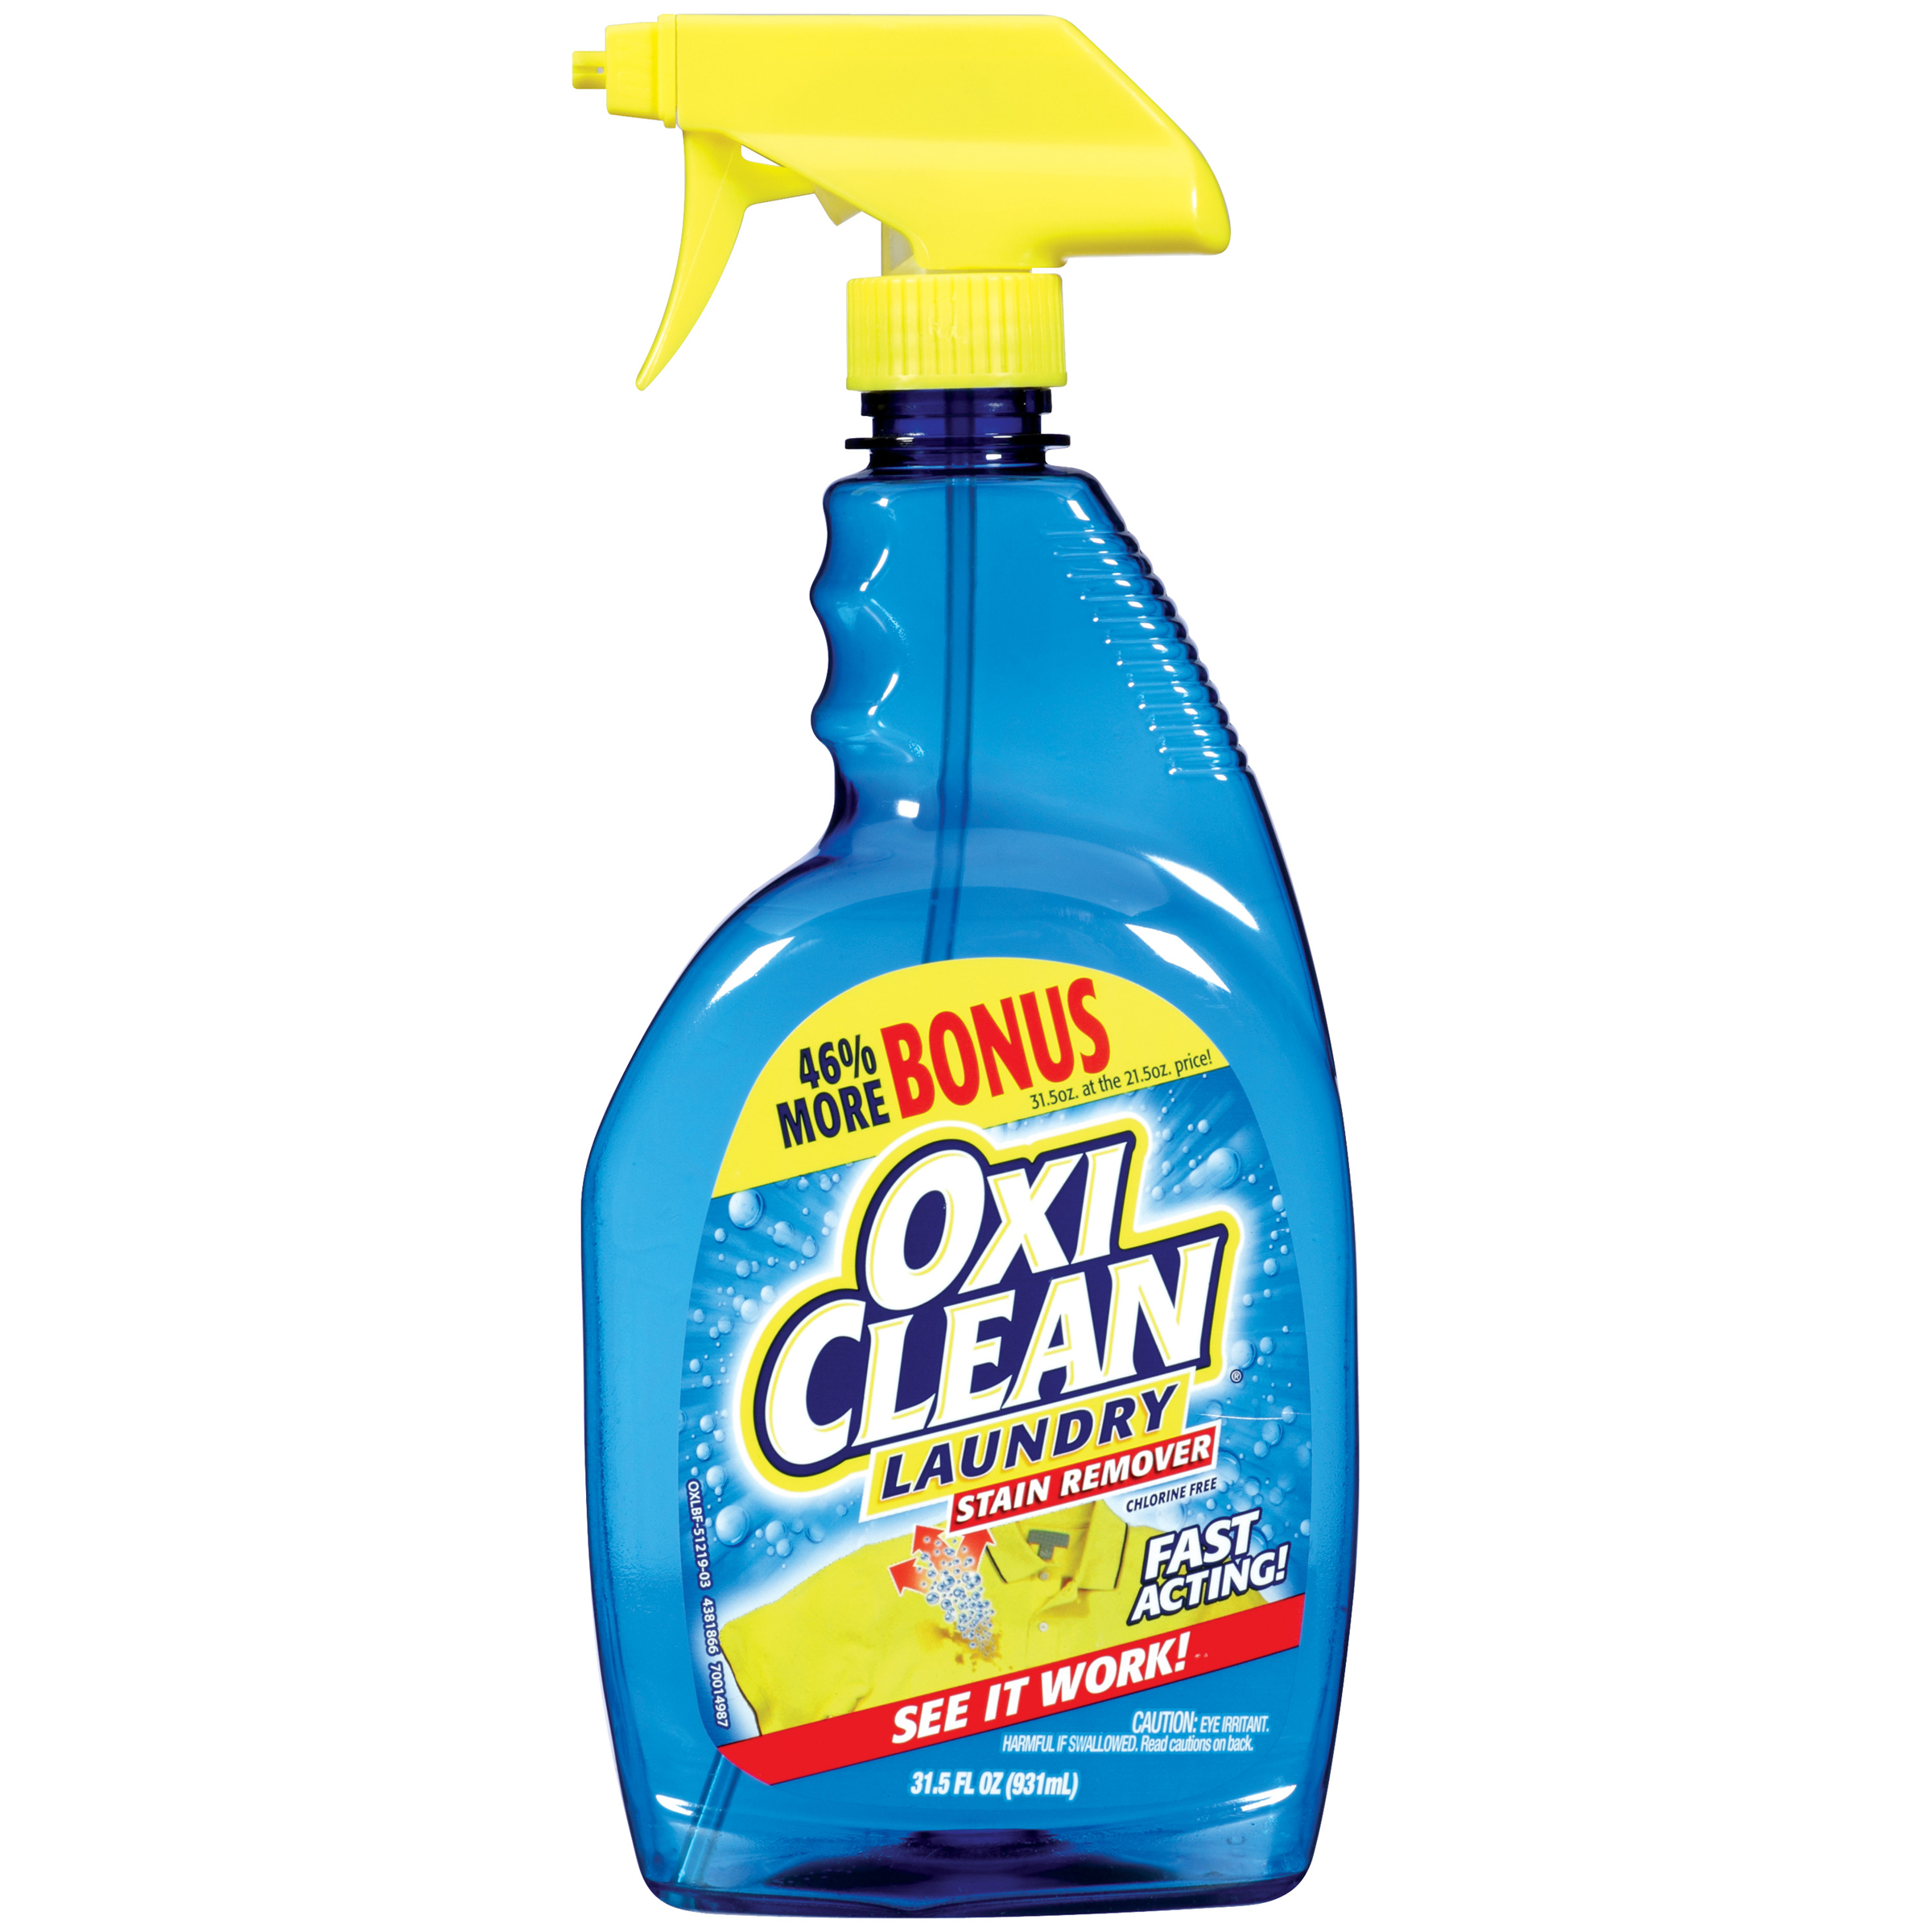 oxi-clean-stain-remover-laundry-chlorine-free-31-5-fl-oz-1-pt-15-5